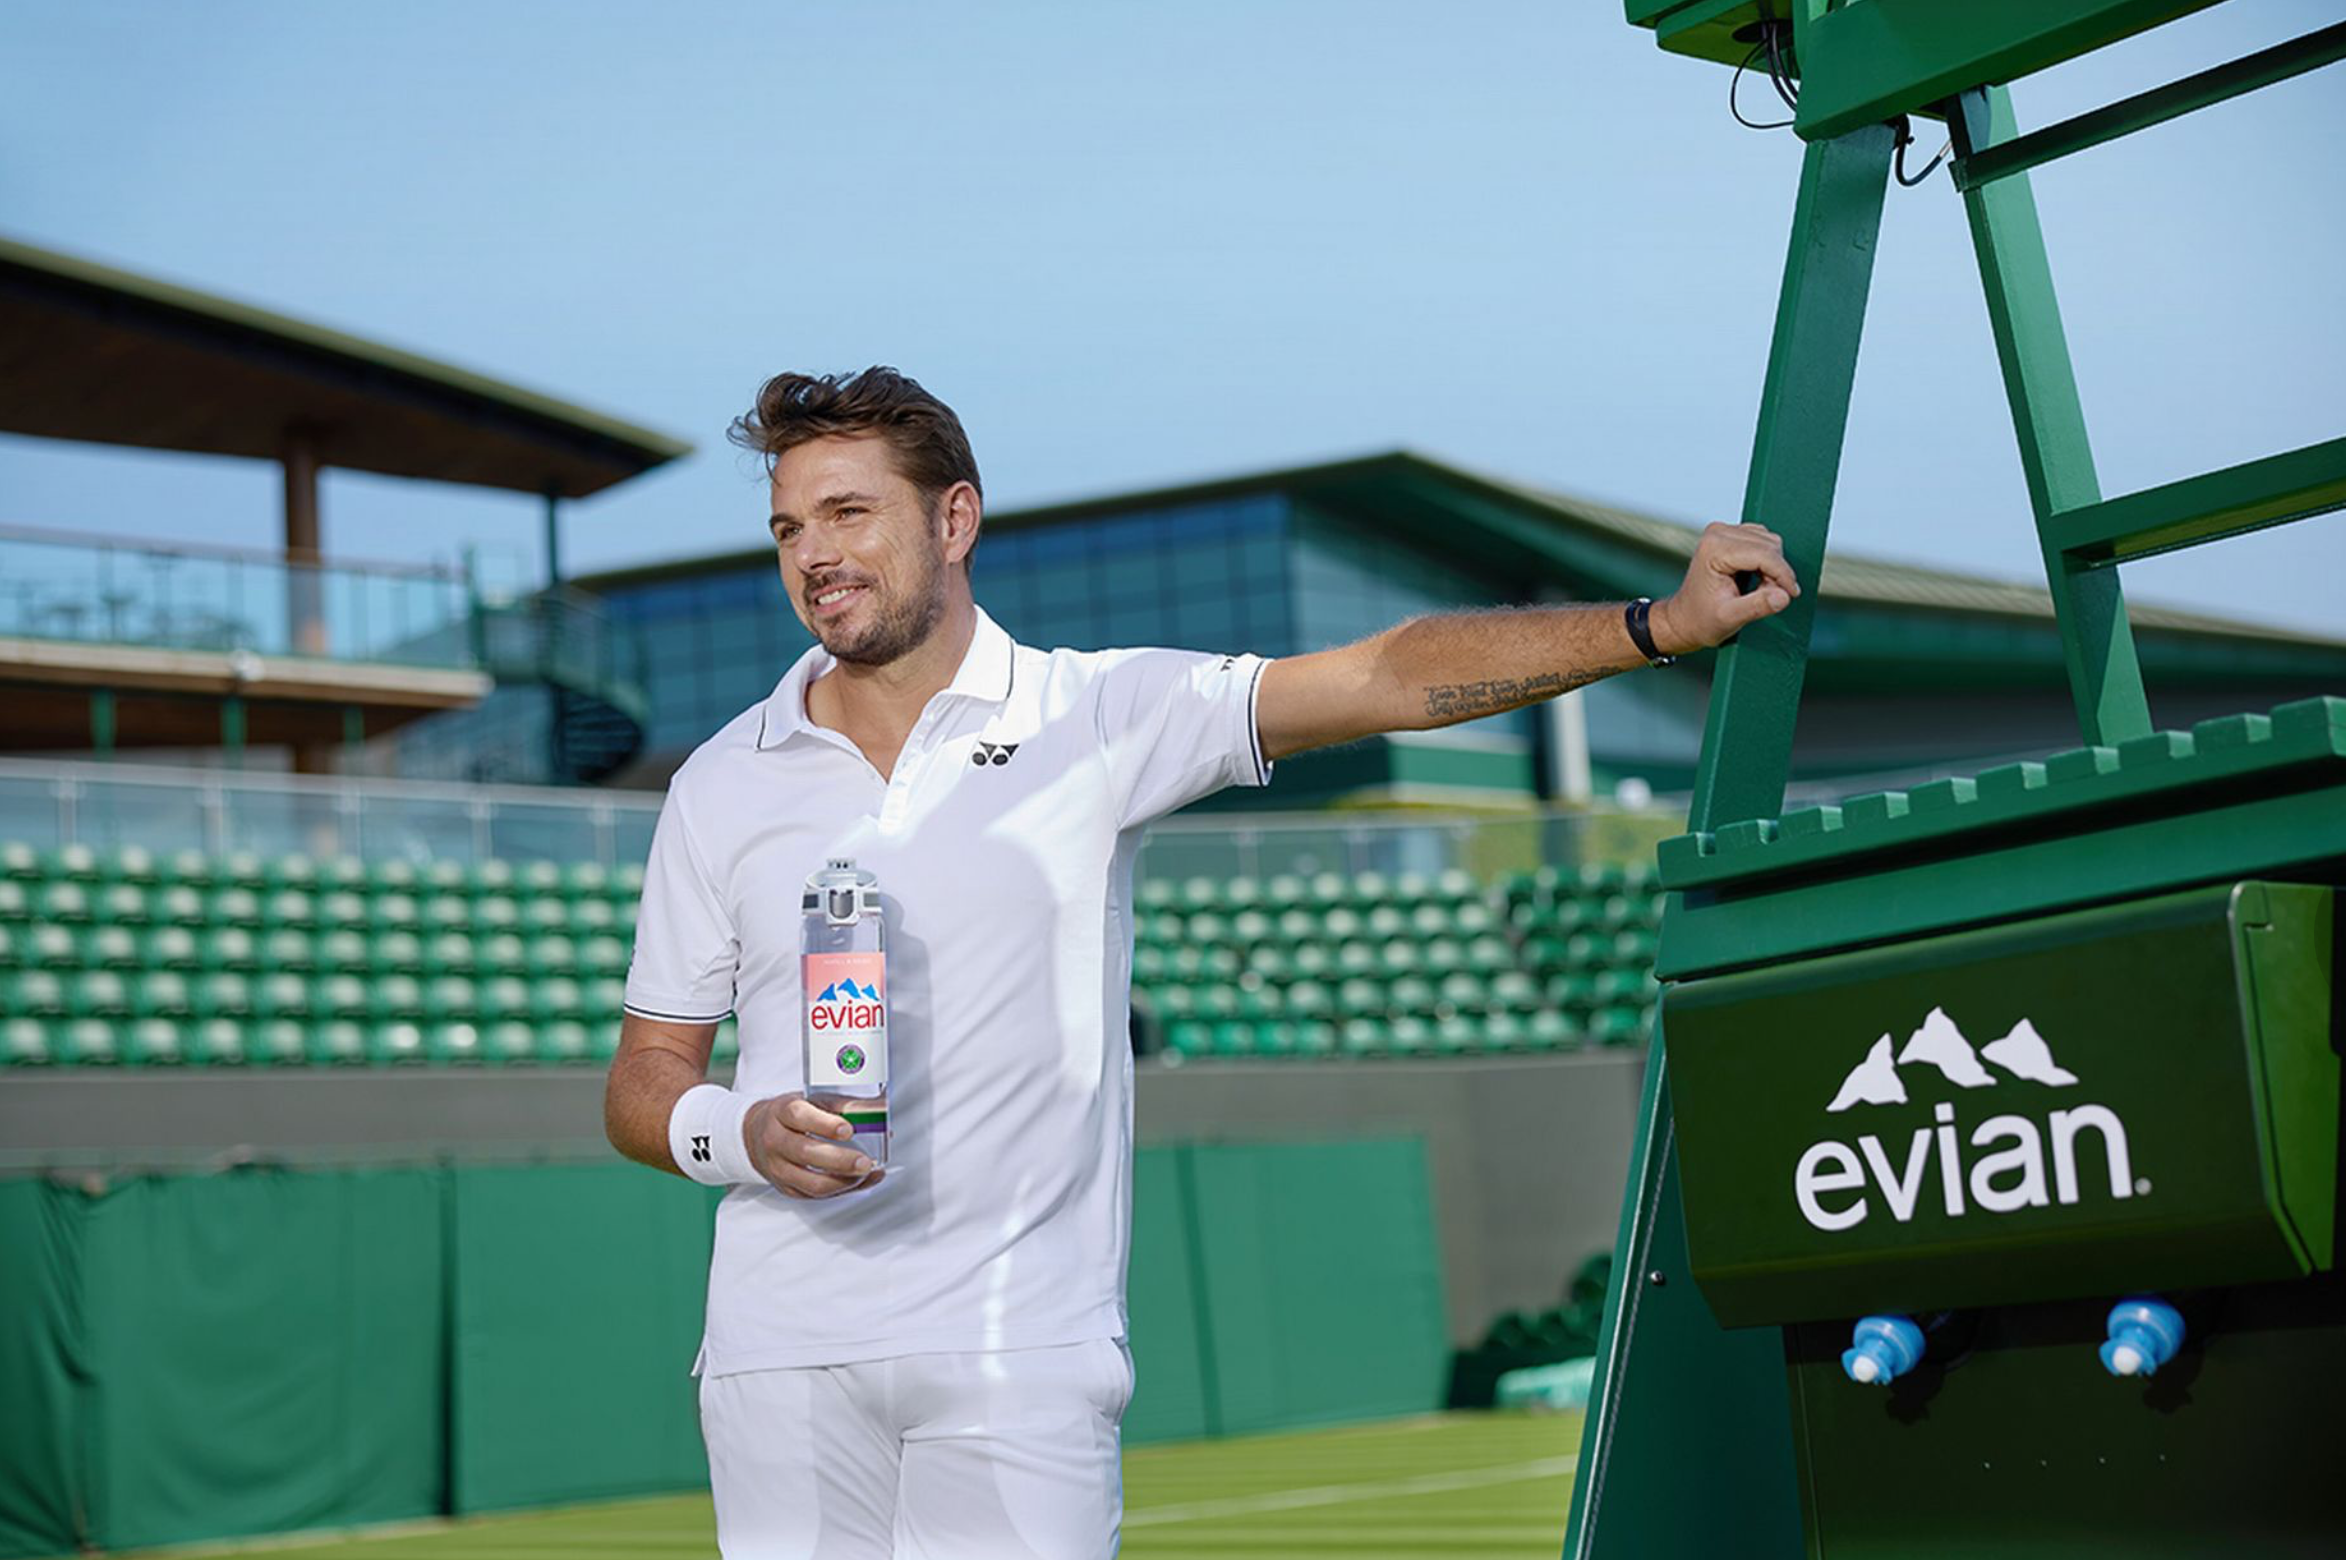 evian and Wimbledon introduce refillable on-court water system